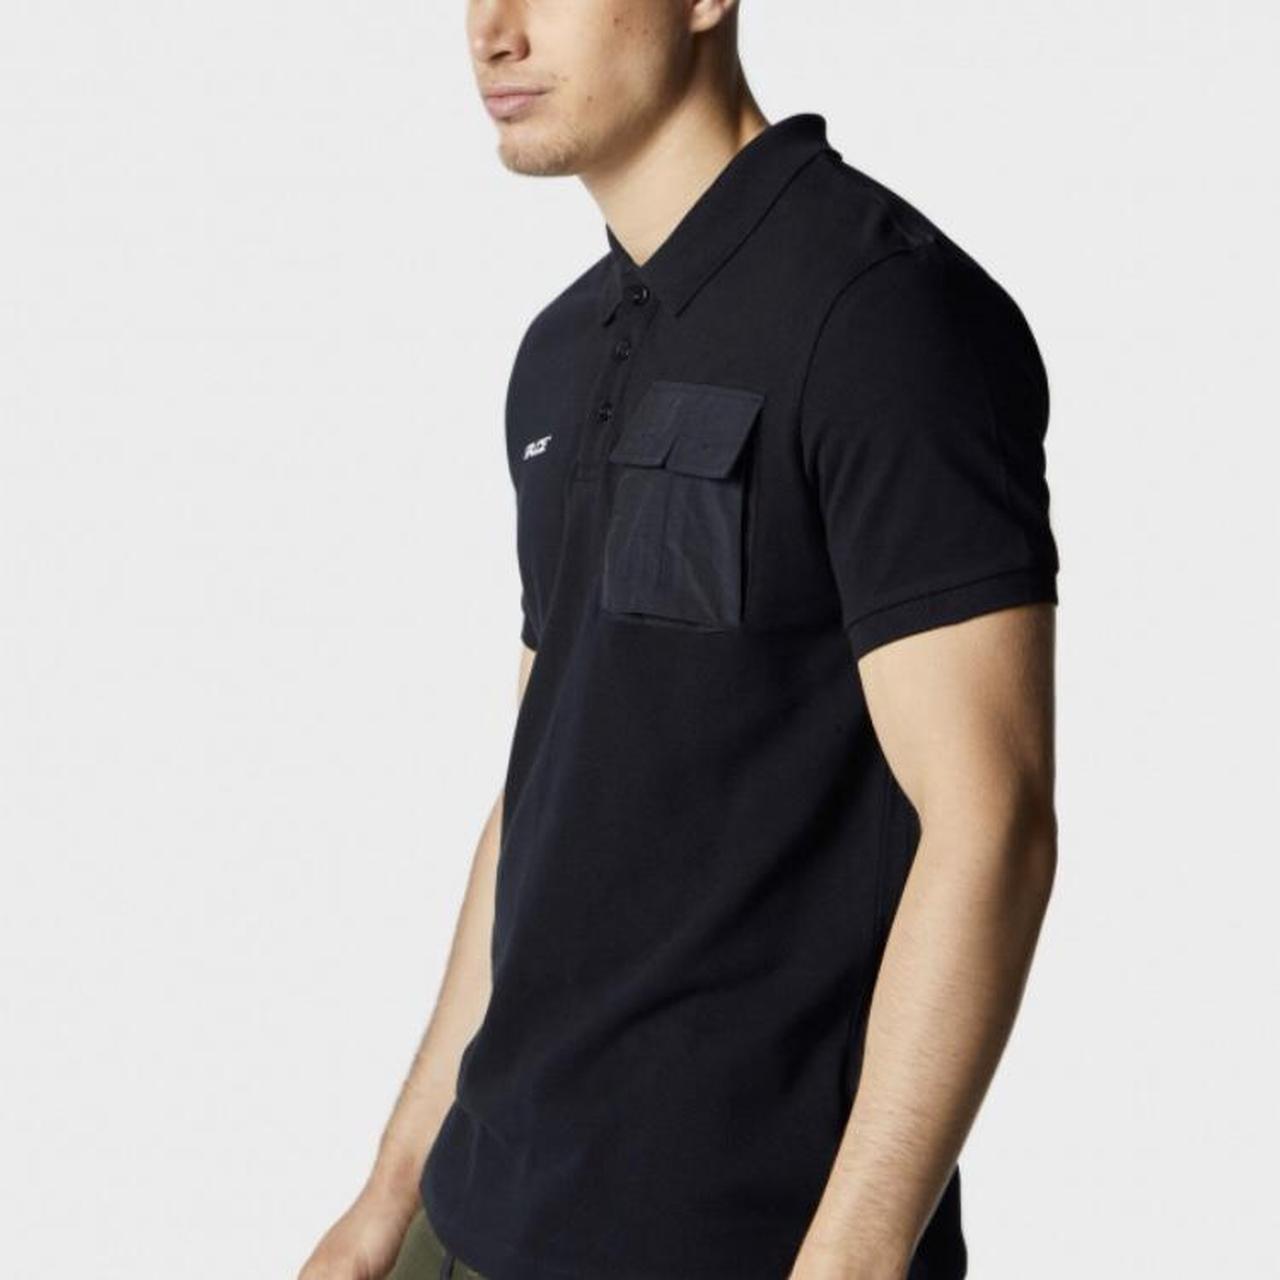 Product Image 3 - 883 POLICE

Orbin Black Polo Shirt

Part